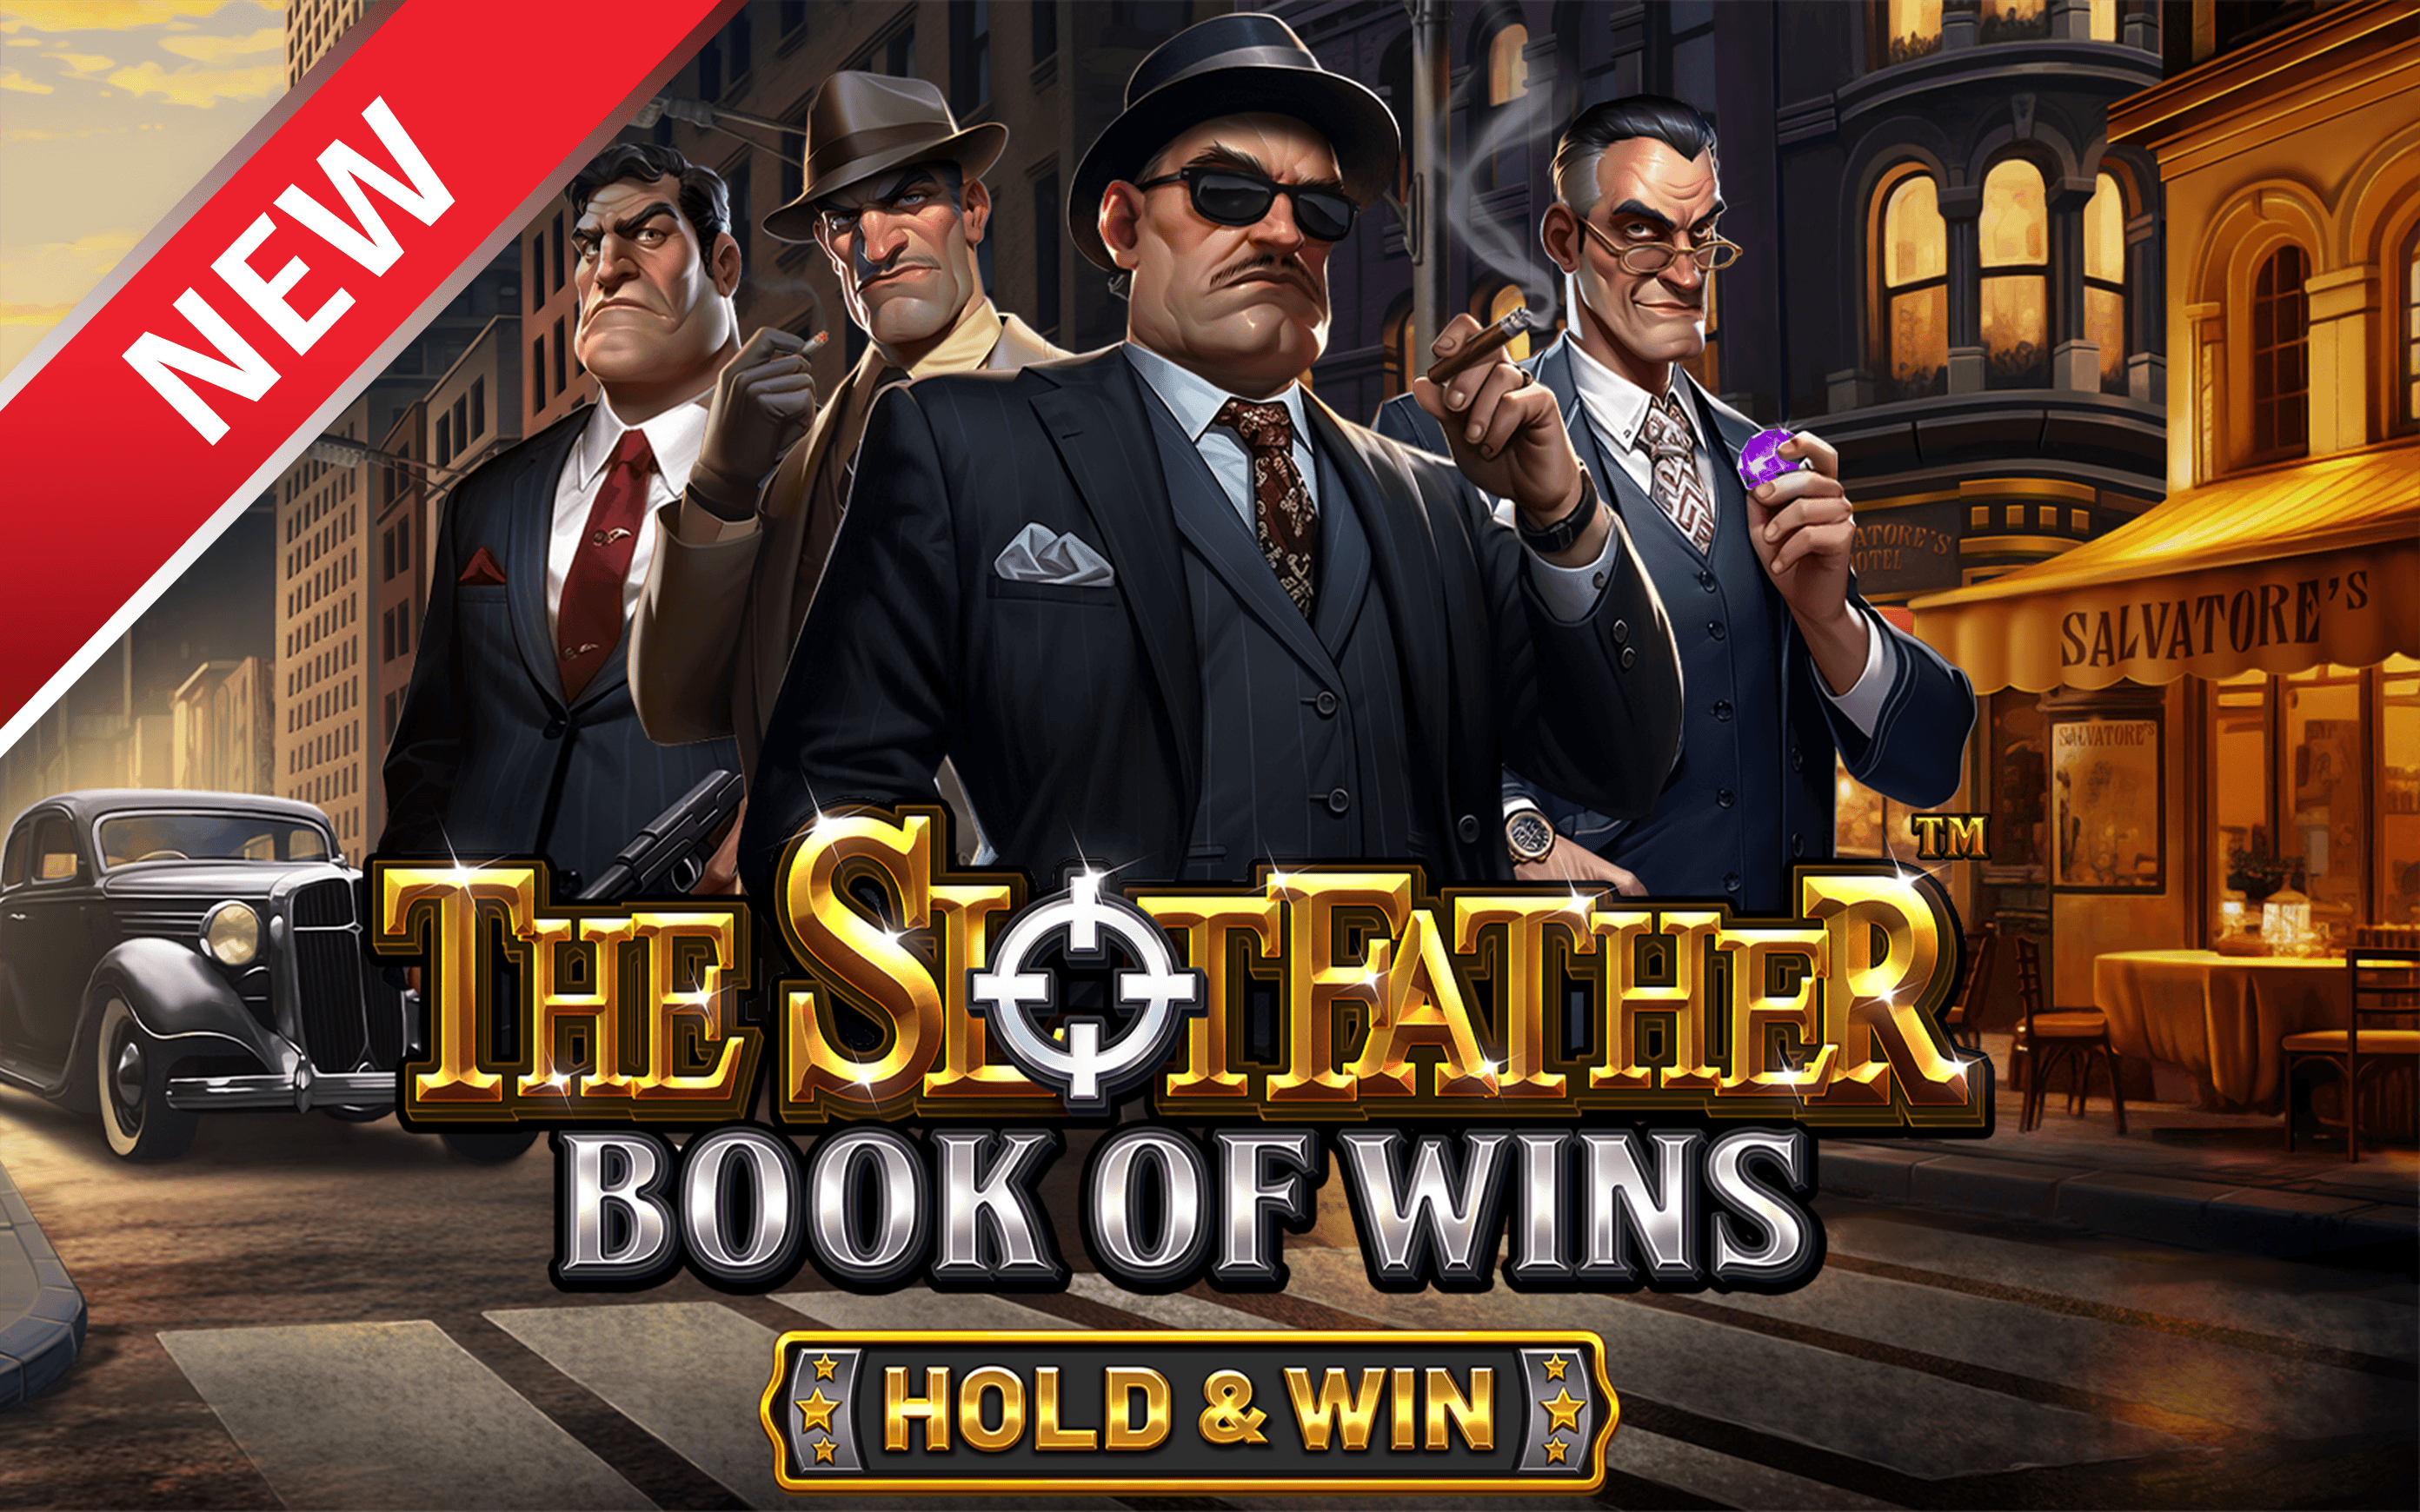 Play The Slotfather: Book of Wins - Hold & Win™ on Starcasino.be online casino